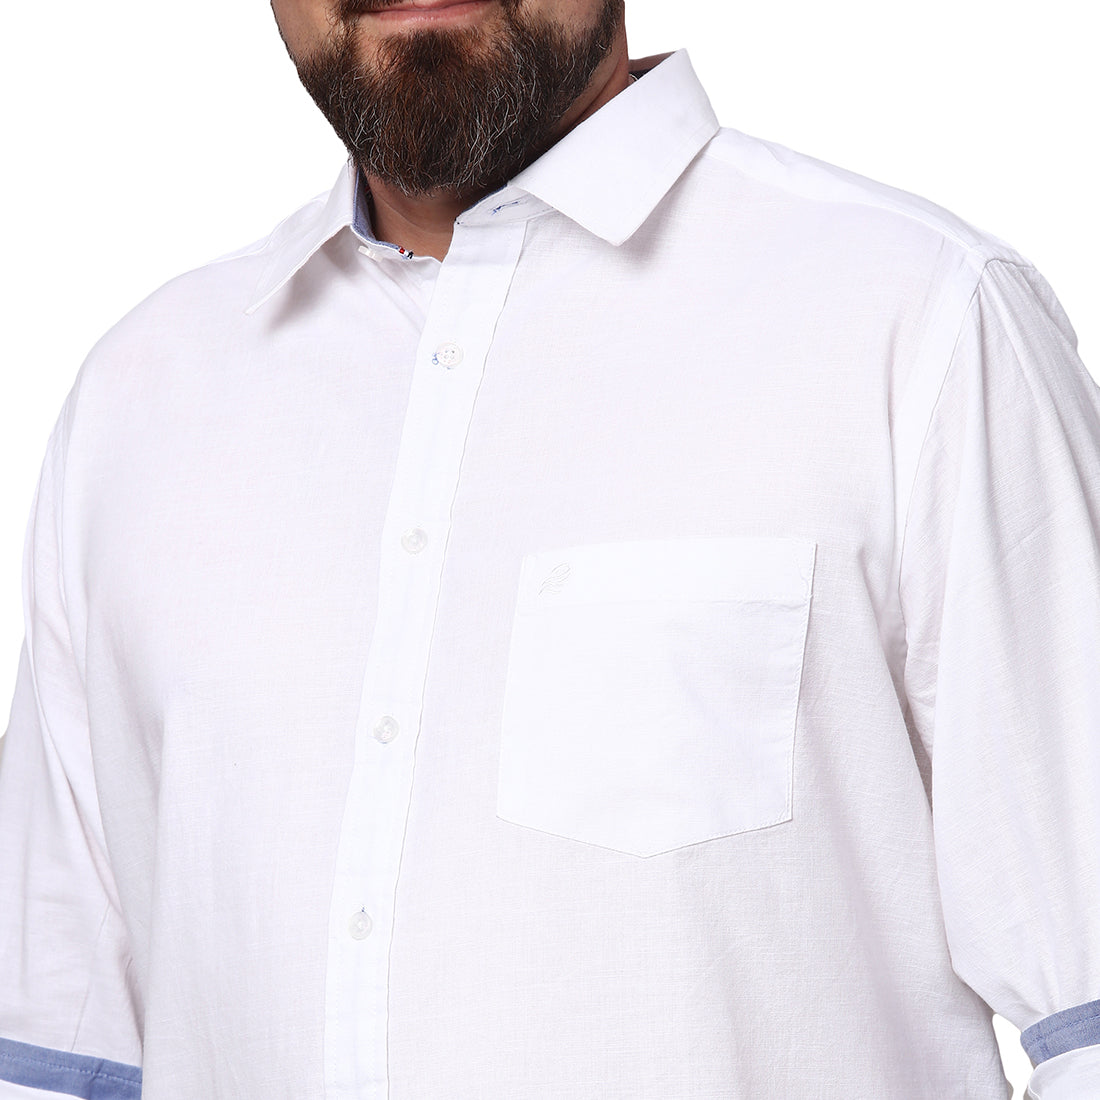 Big & Bold Solid White Full Sleeves Slim Fit Casual Shirts (Plus Size) - Double Two